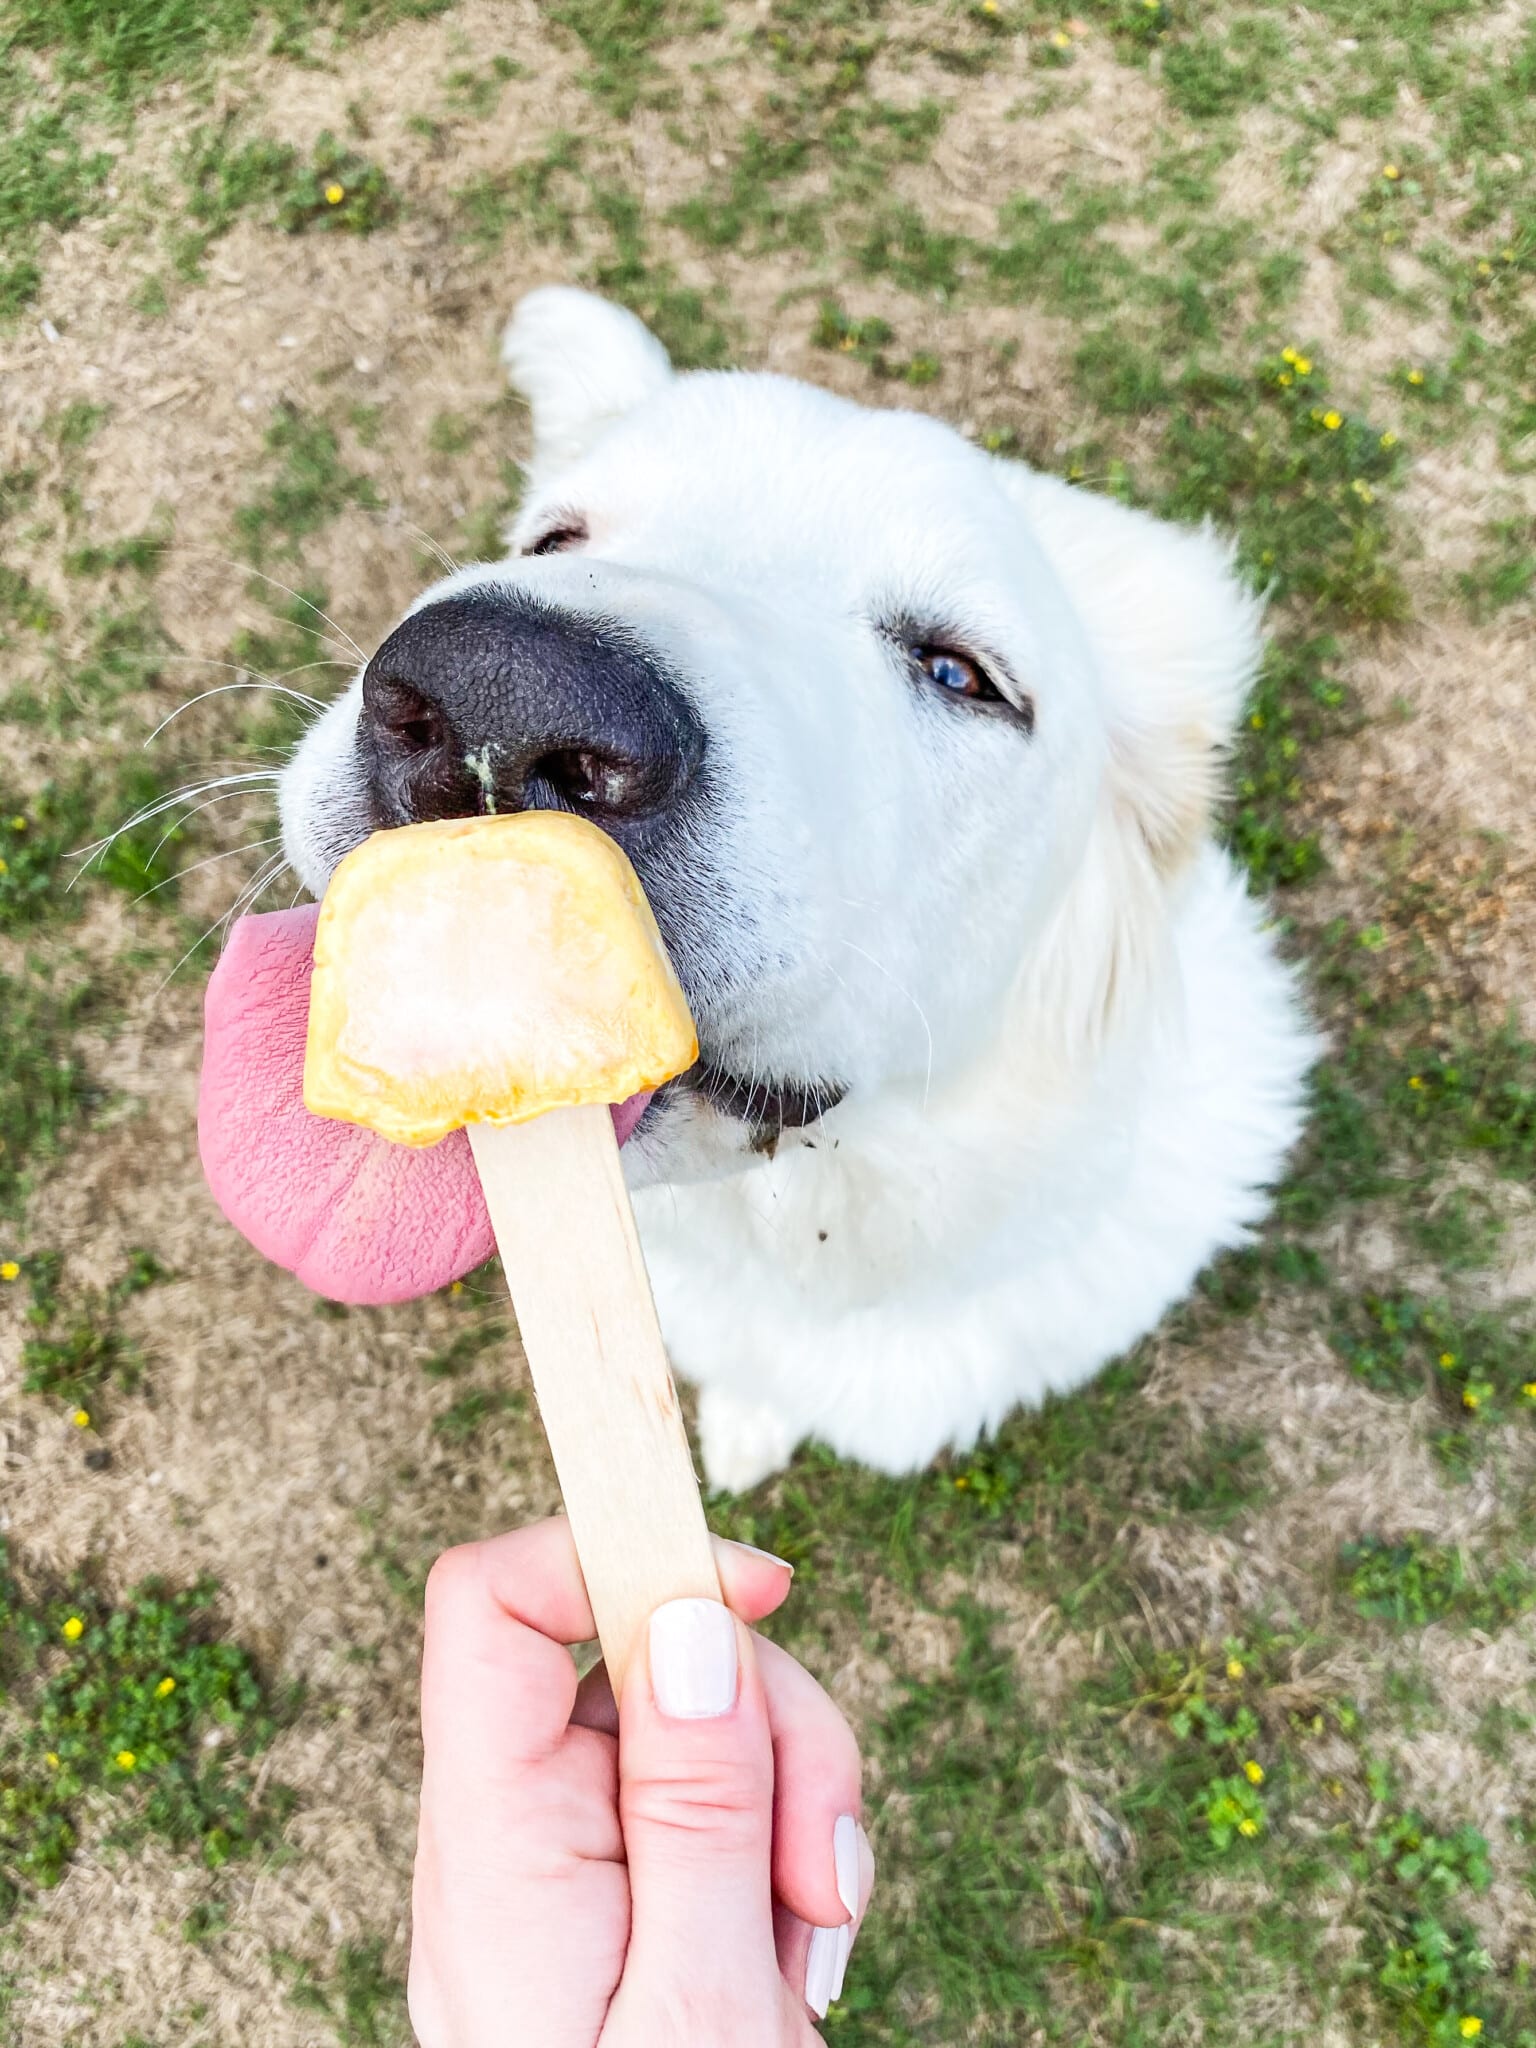 a puppy licking a probiotic yogurt pupsicle that a human hand is holding in a grassy yard